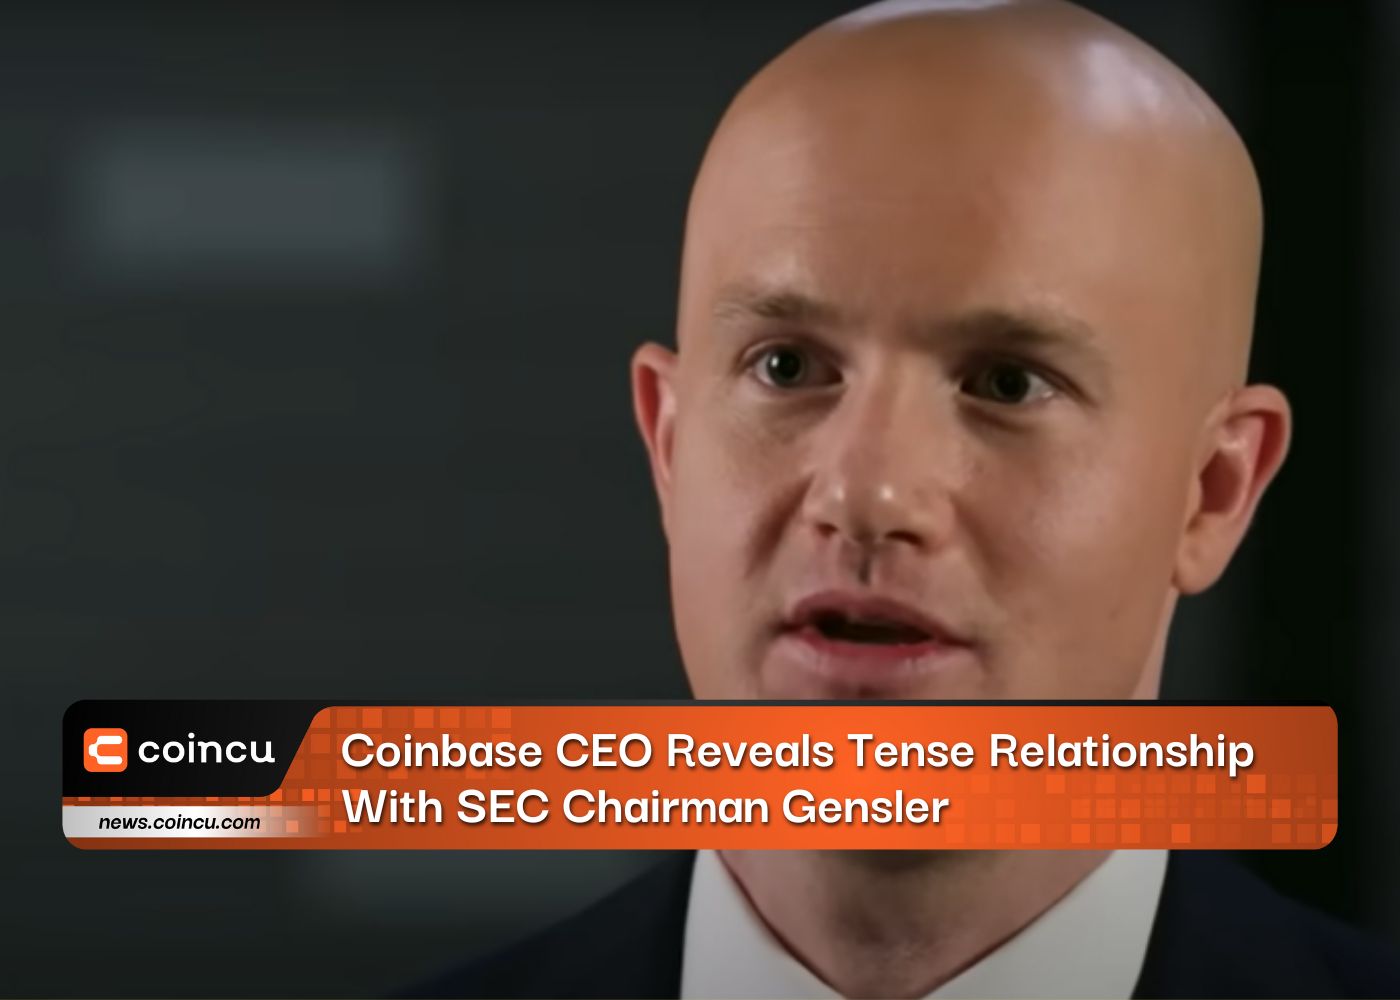 Coinbase CEO Reveals Tense Relationship With SEC Chairman Gensler